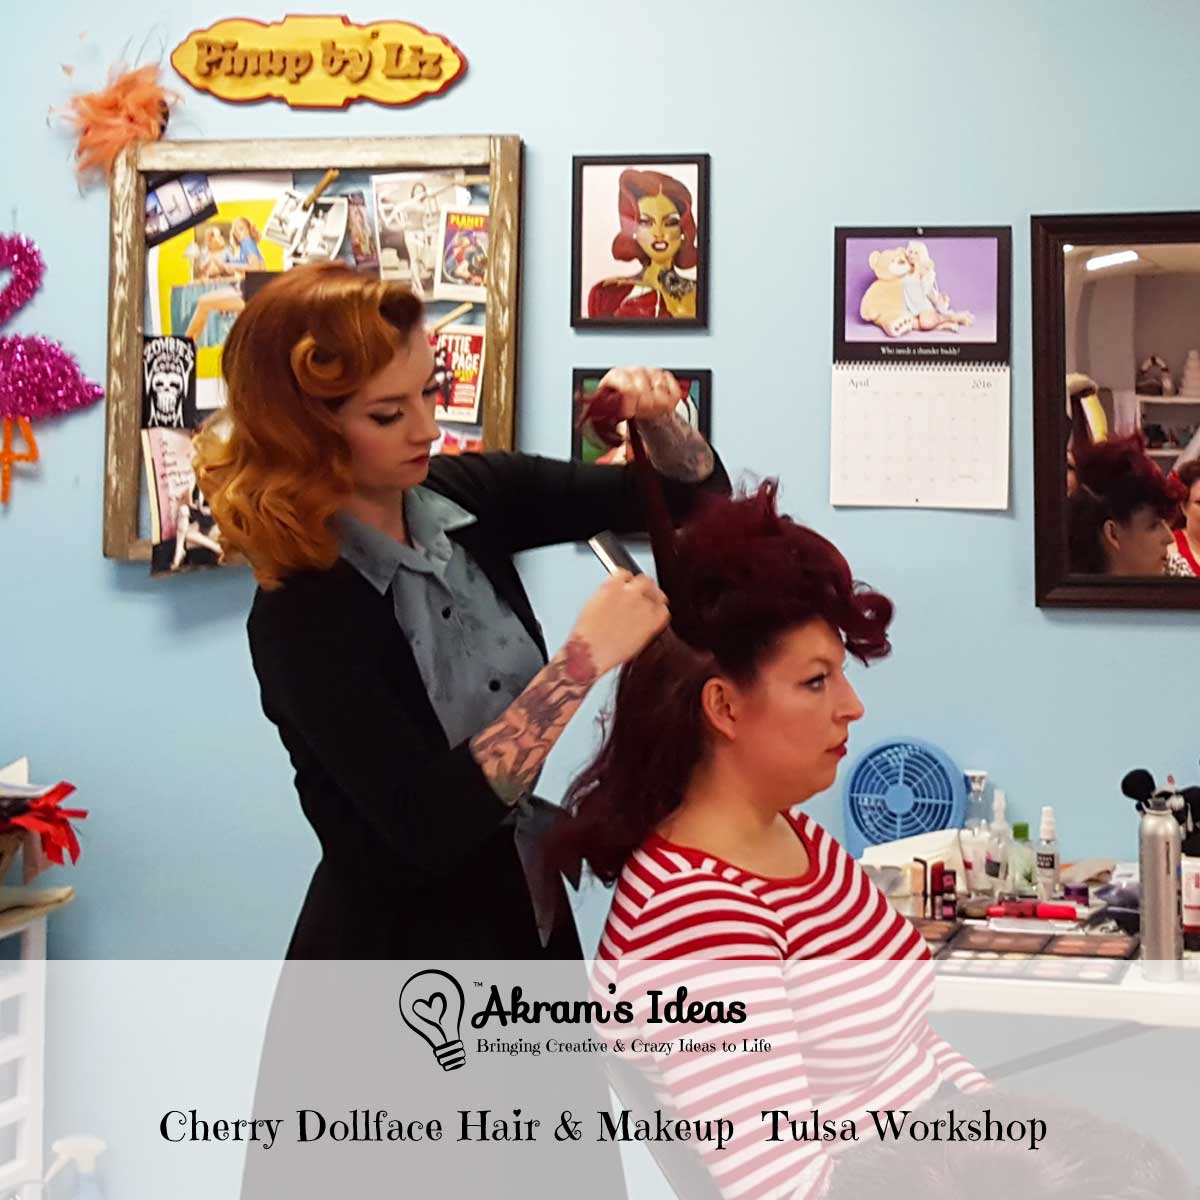 Review and recap of the Cherry Dollface Hair & Makeup Tulsa Workshop this past weekend. I learned a lot of tips and techniques that were totally worth it.